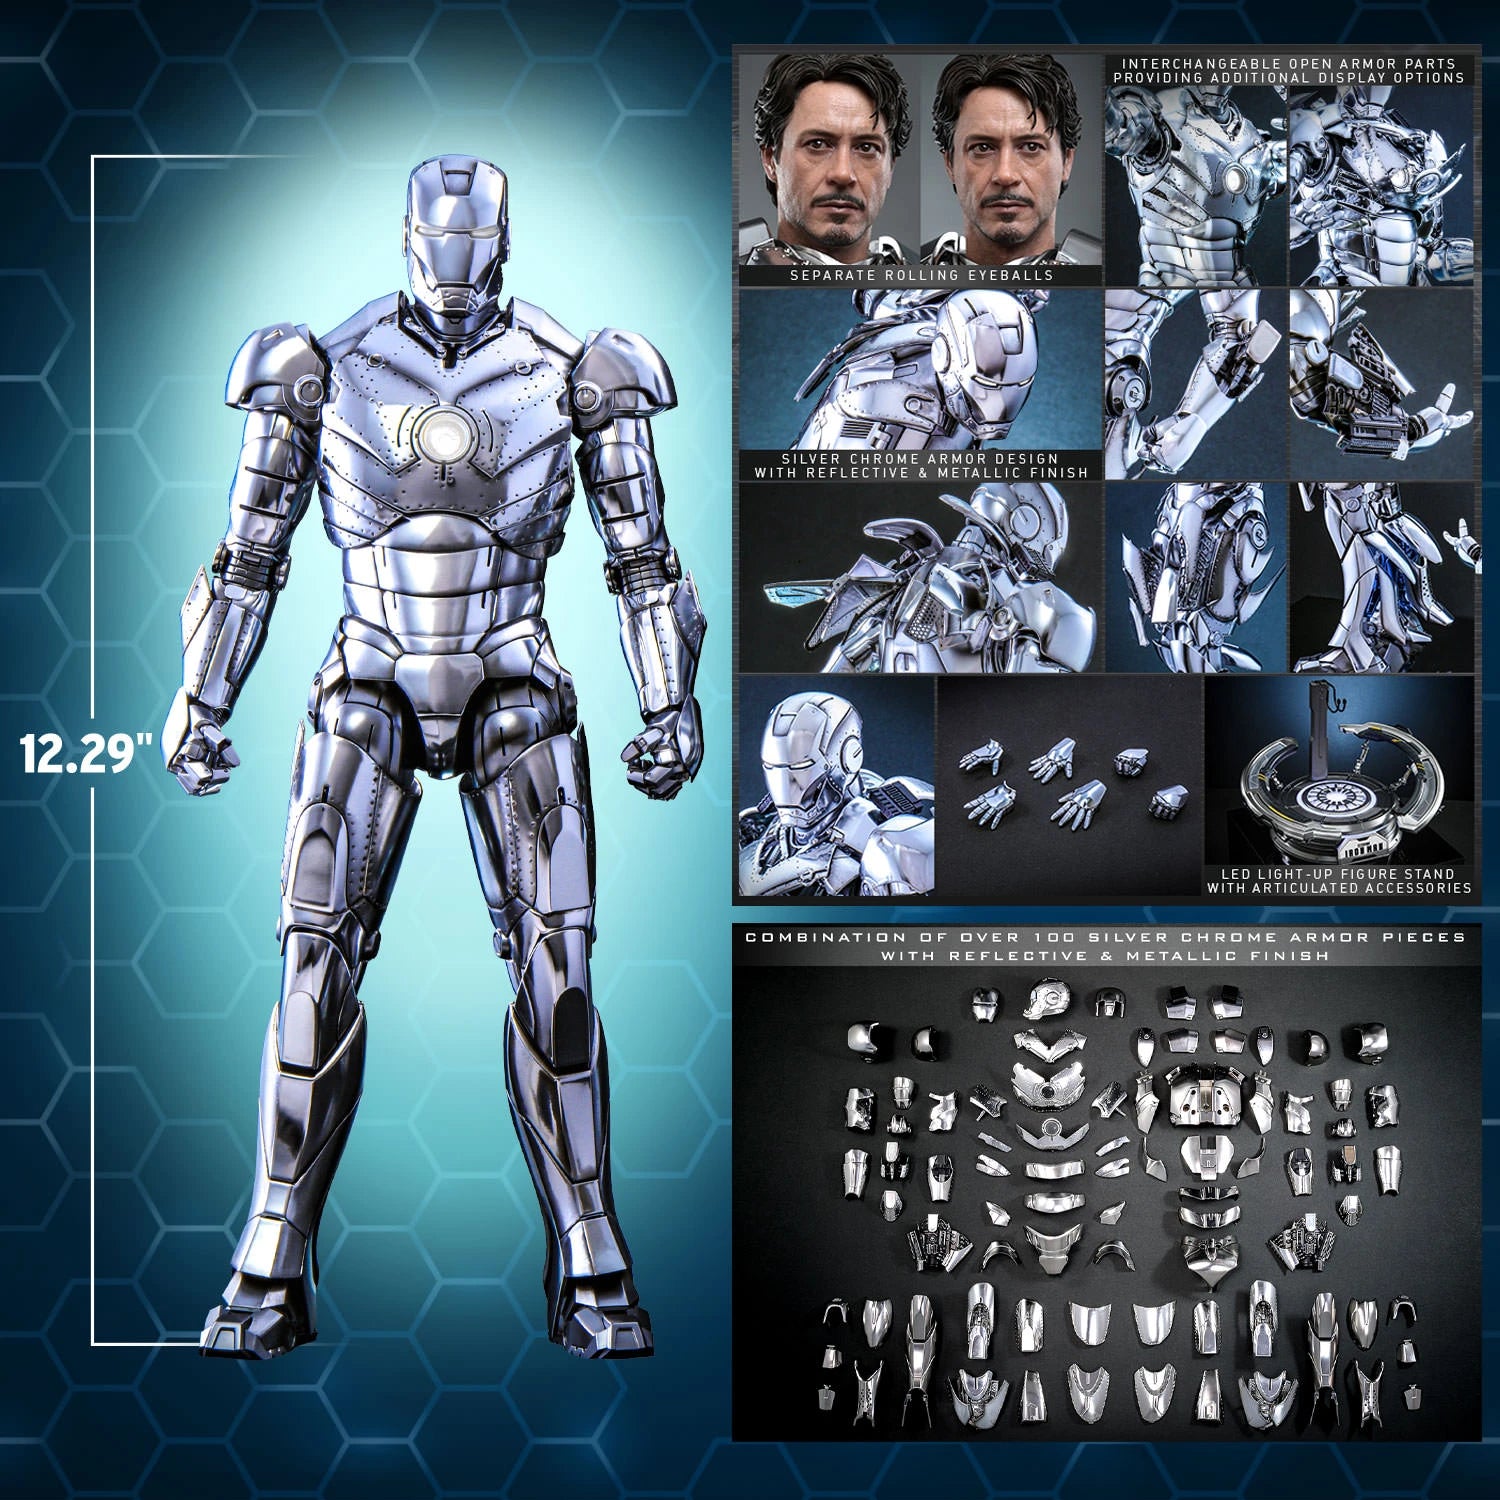 IRON MAN MARK II (2.0) Sixth Scale Figure by Hot Toys